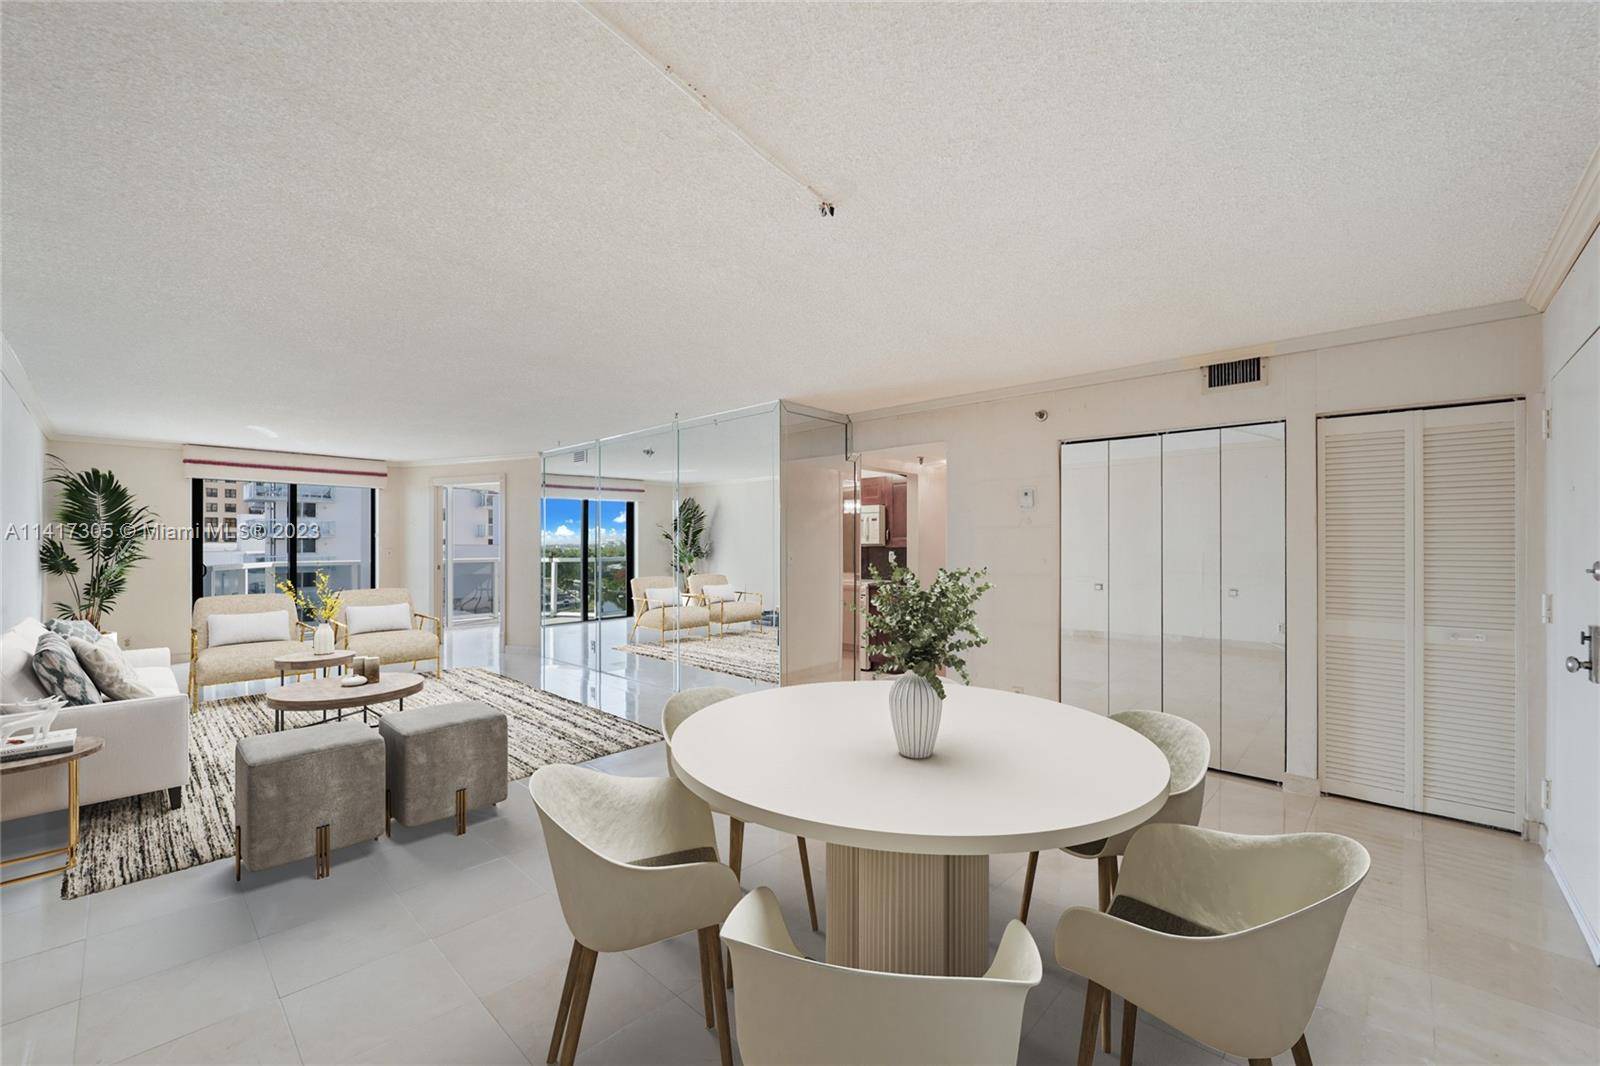 This spacious, light filled 2 bed 2 bath unit is located in an immaculate beachfront property steps from the boardwalk, the ocean, the One Hotel, and Miami Beach's restaurants and ...